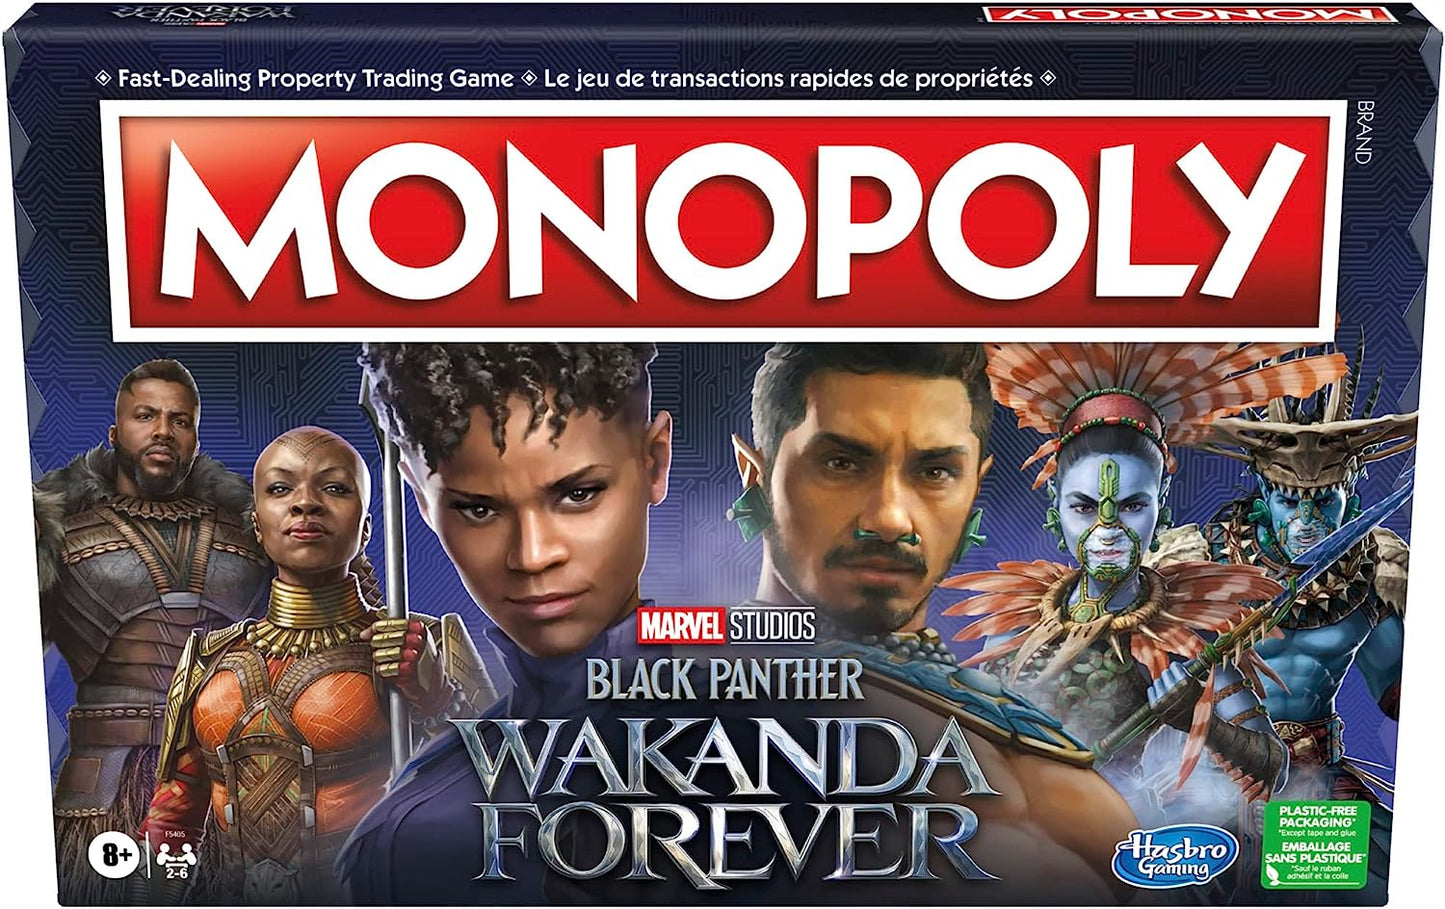 MONOPOLY BLACK PANTHER 2 Wakanda Forever